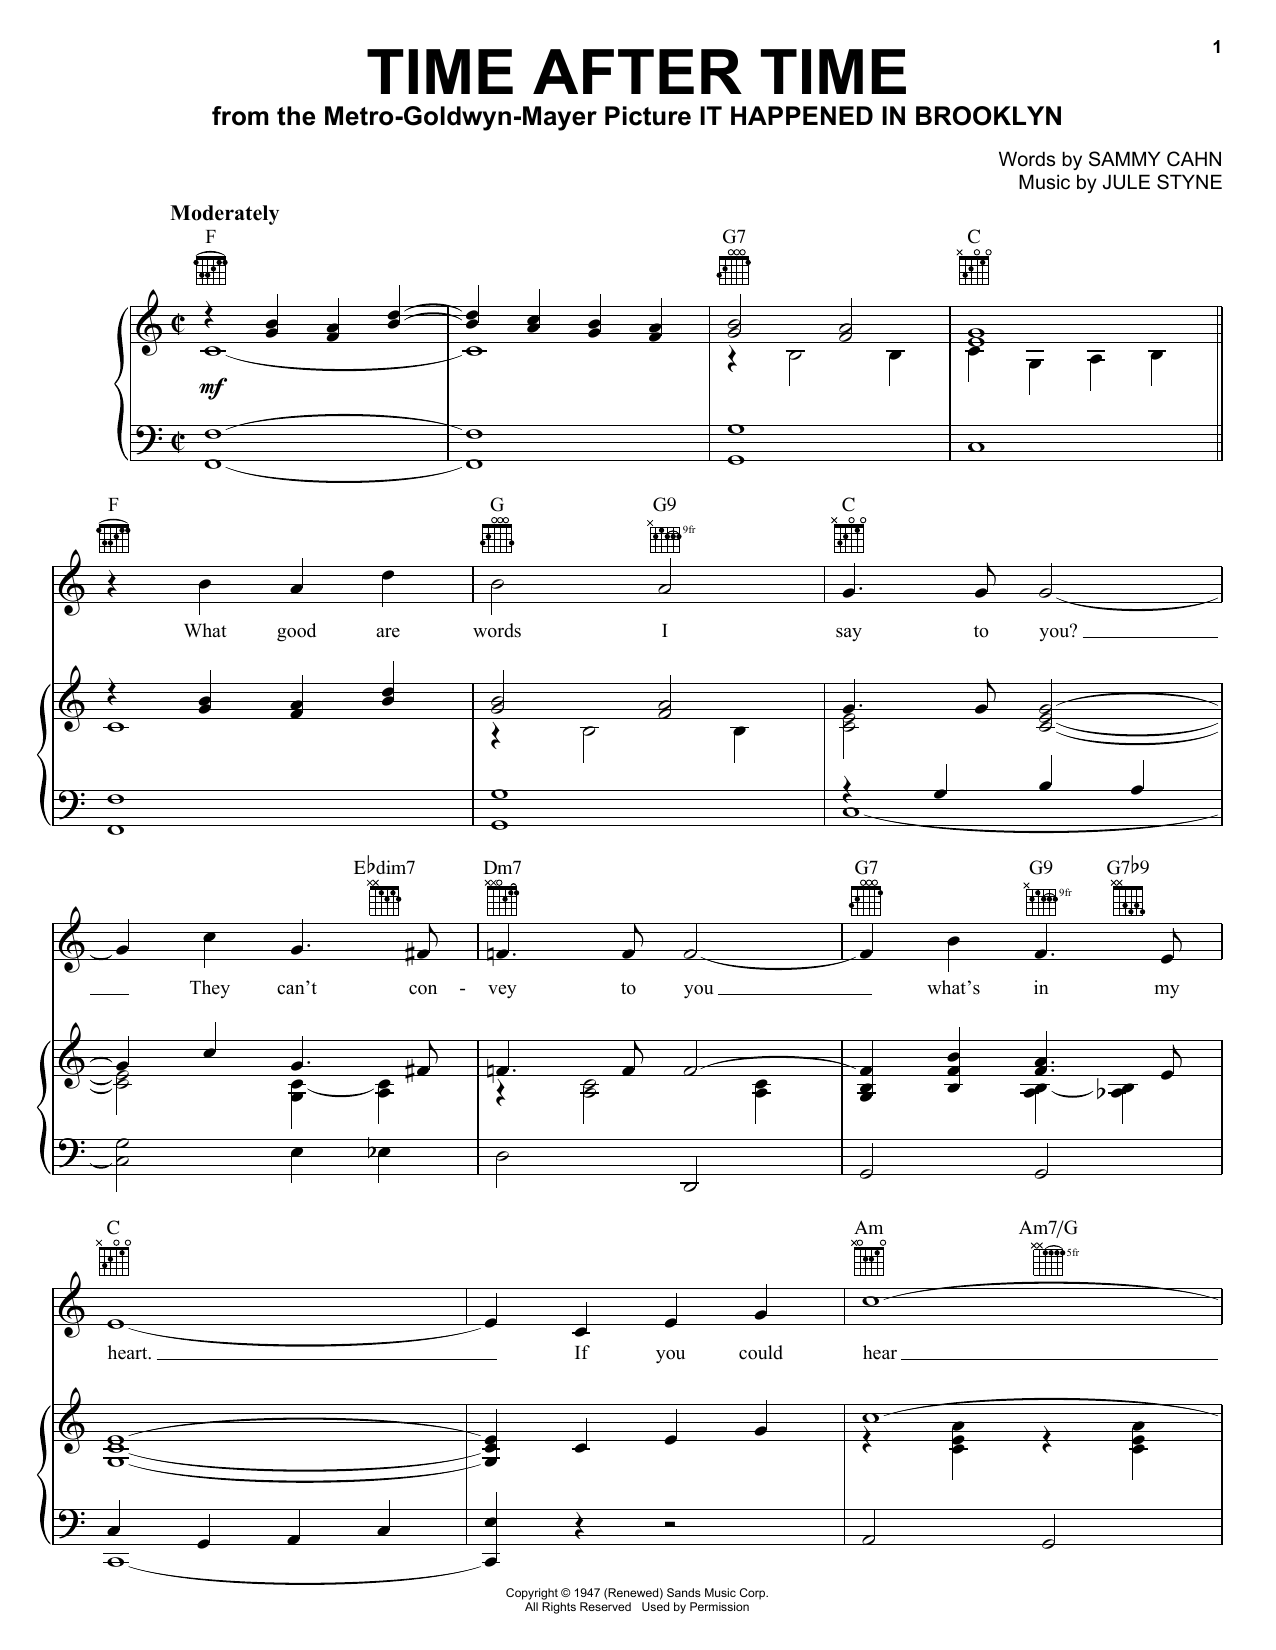 Frank Sinatra Time After Time sheet music notes and chords. Download Printable PDF.